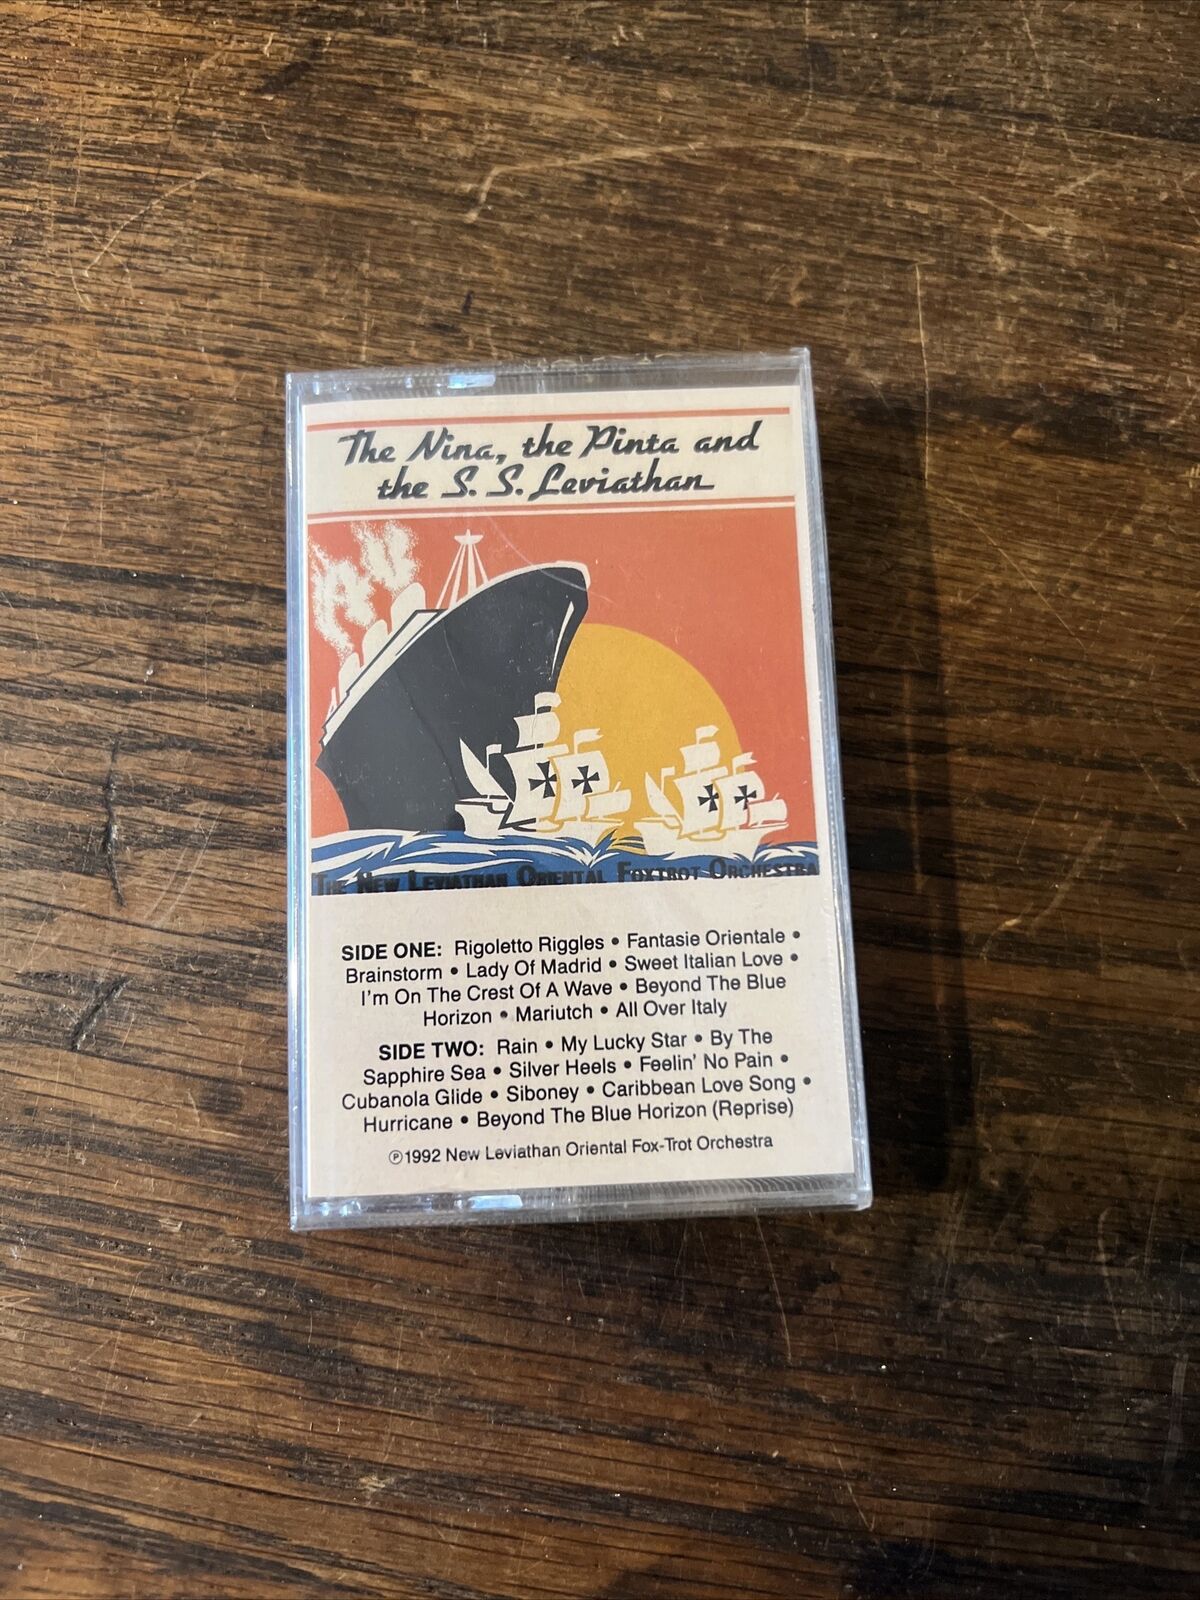 NEW LEVIATHAN ORIENTAL FOX-TROT ORCHESTRA The Nina Pinta & The SS Tape Cassette